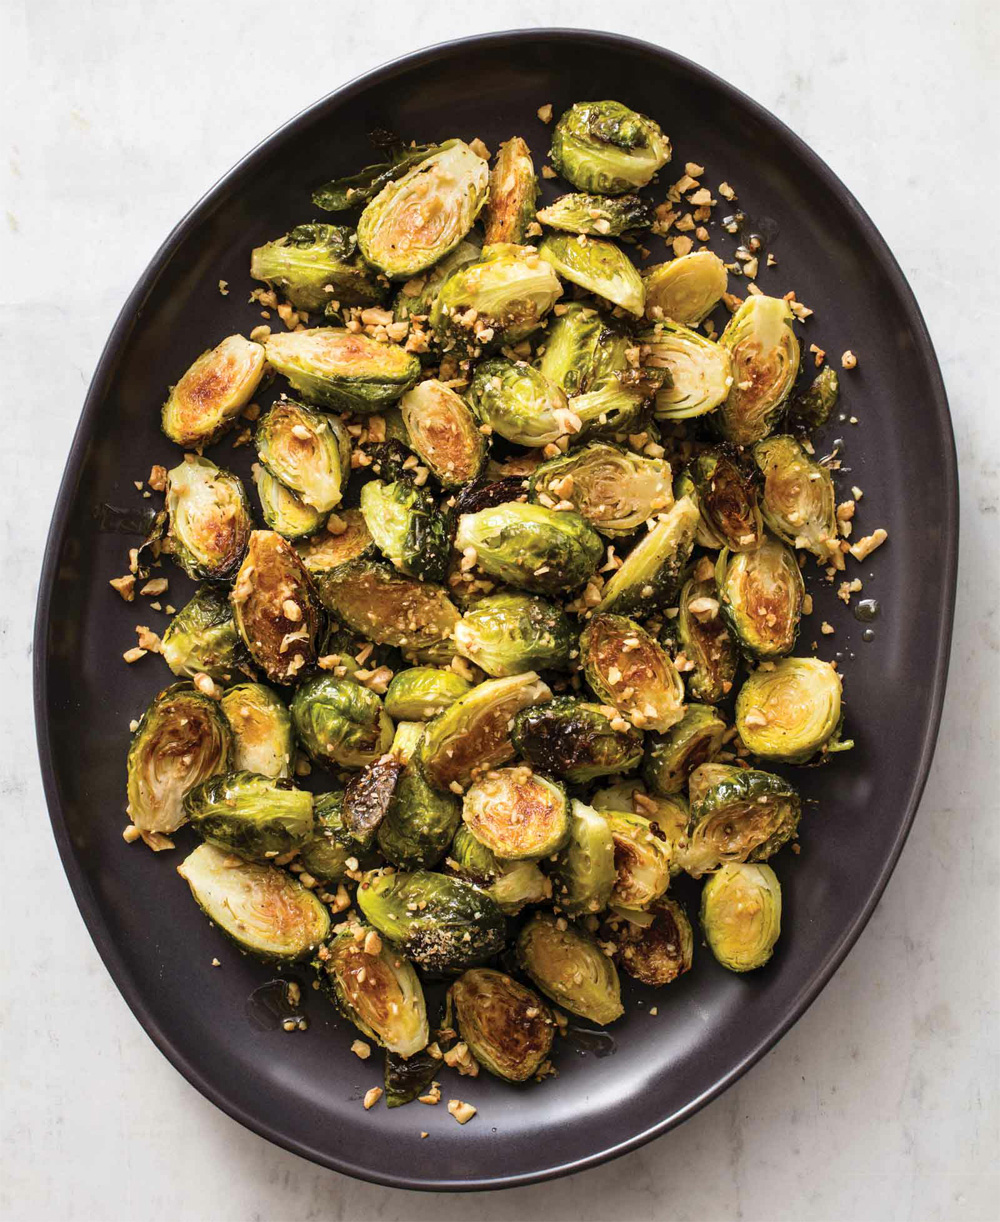 Roasted brussels sprouts with walnuts and lemon recipe